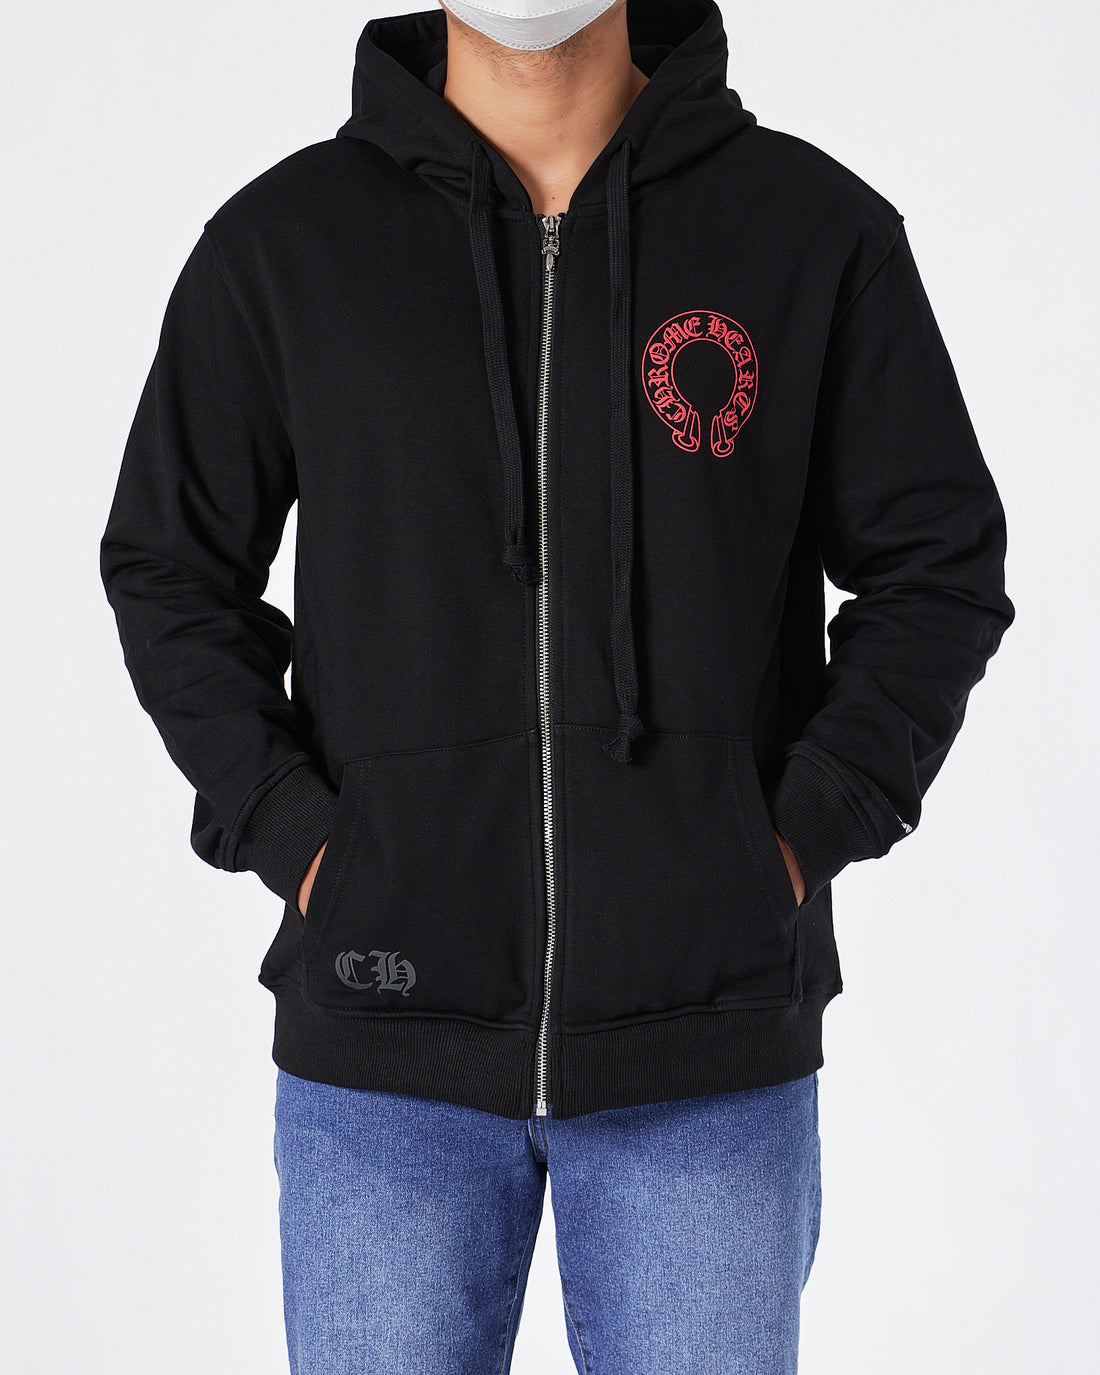 CH Front And Back Logo Printed Men Black Hoodie 39.90